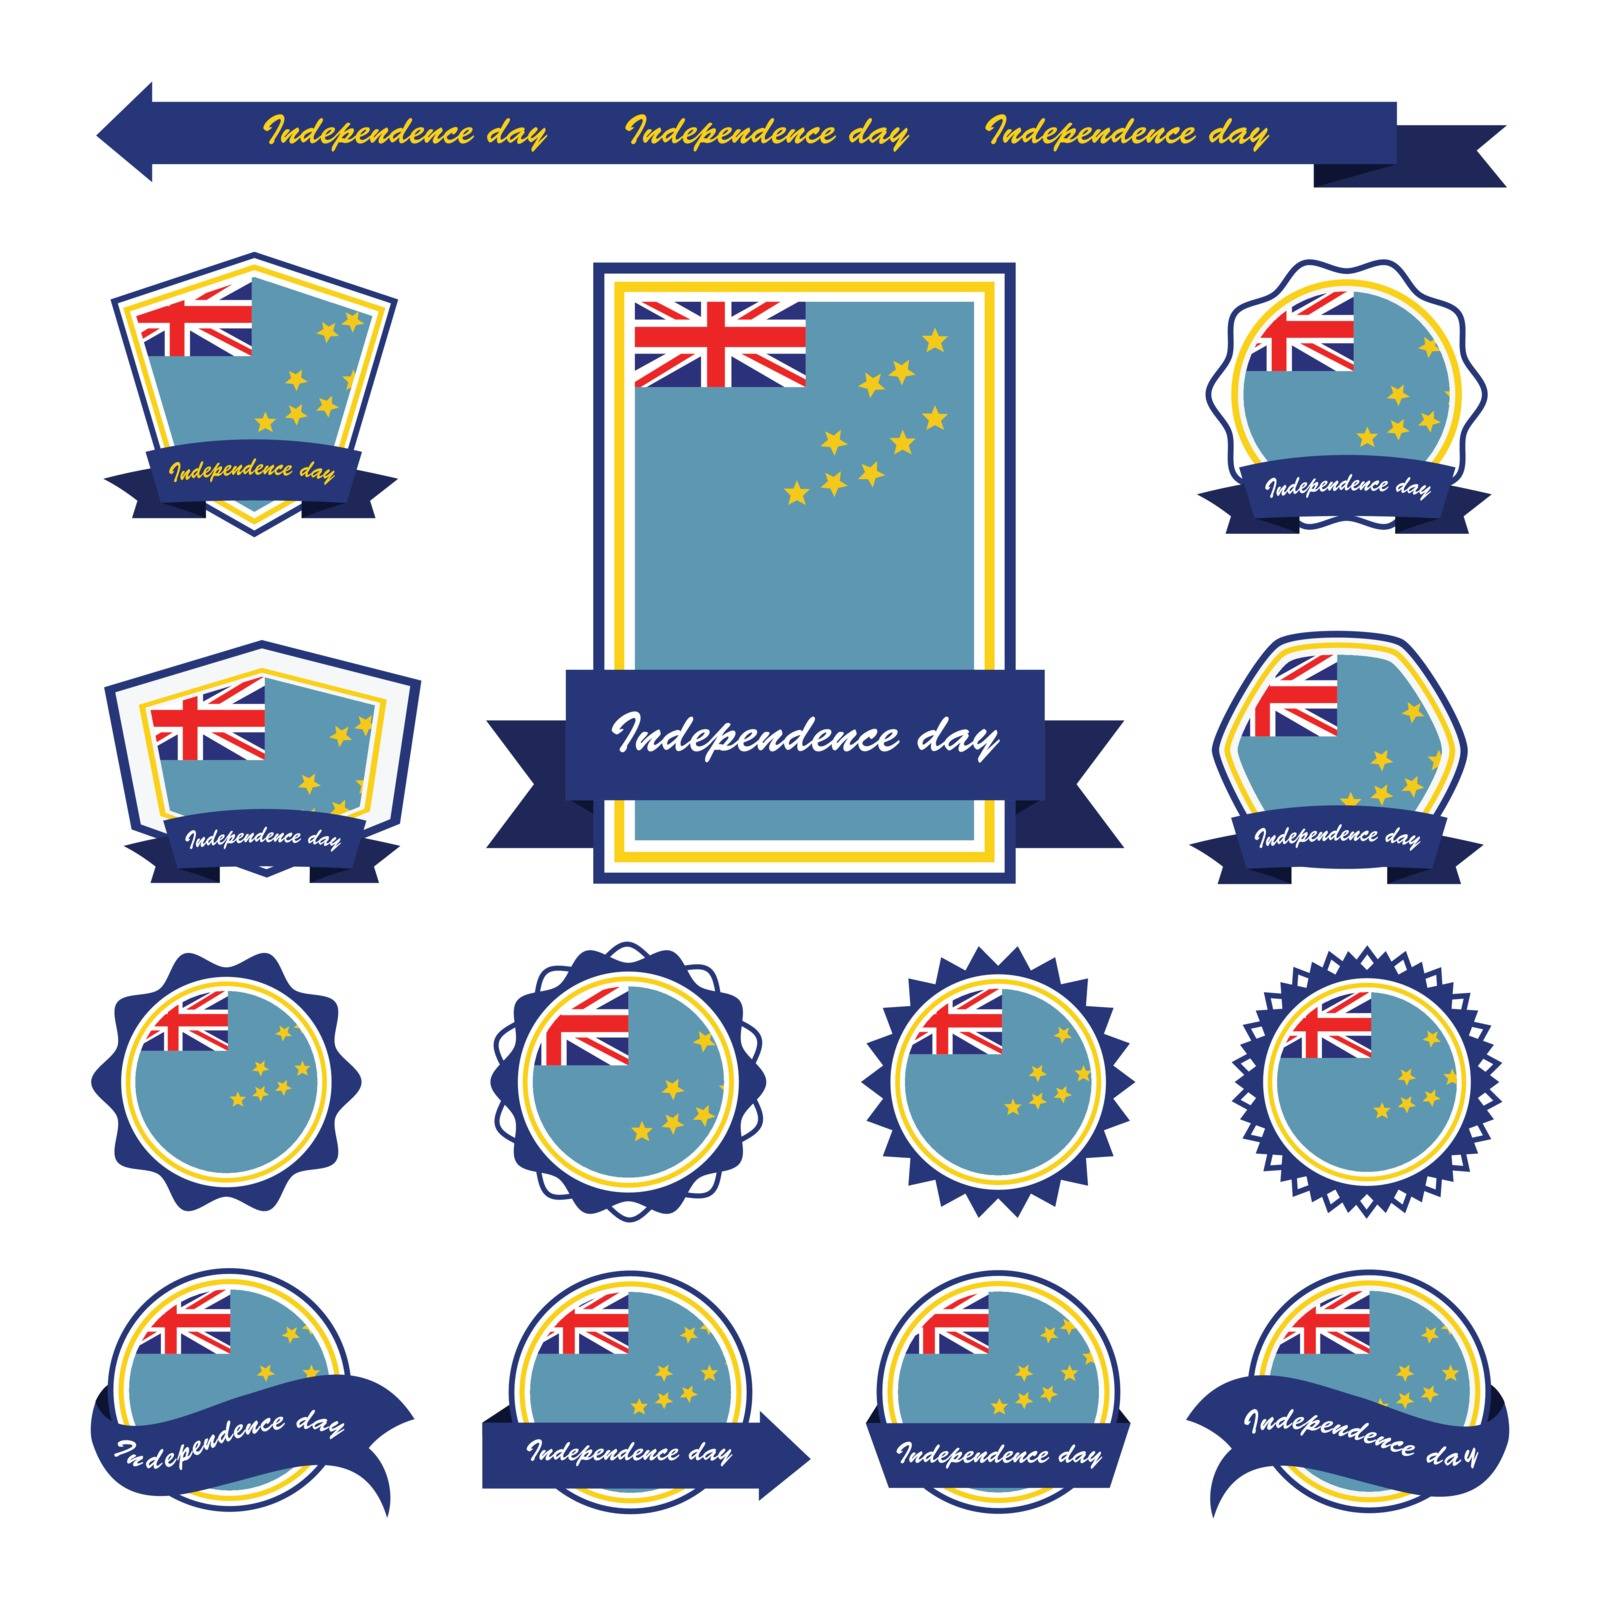 Tuvalu independence day flags infographic design